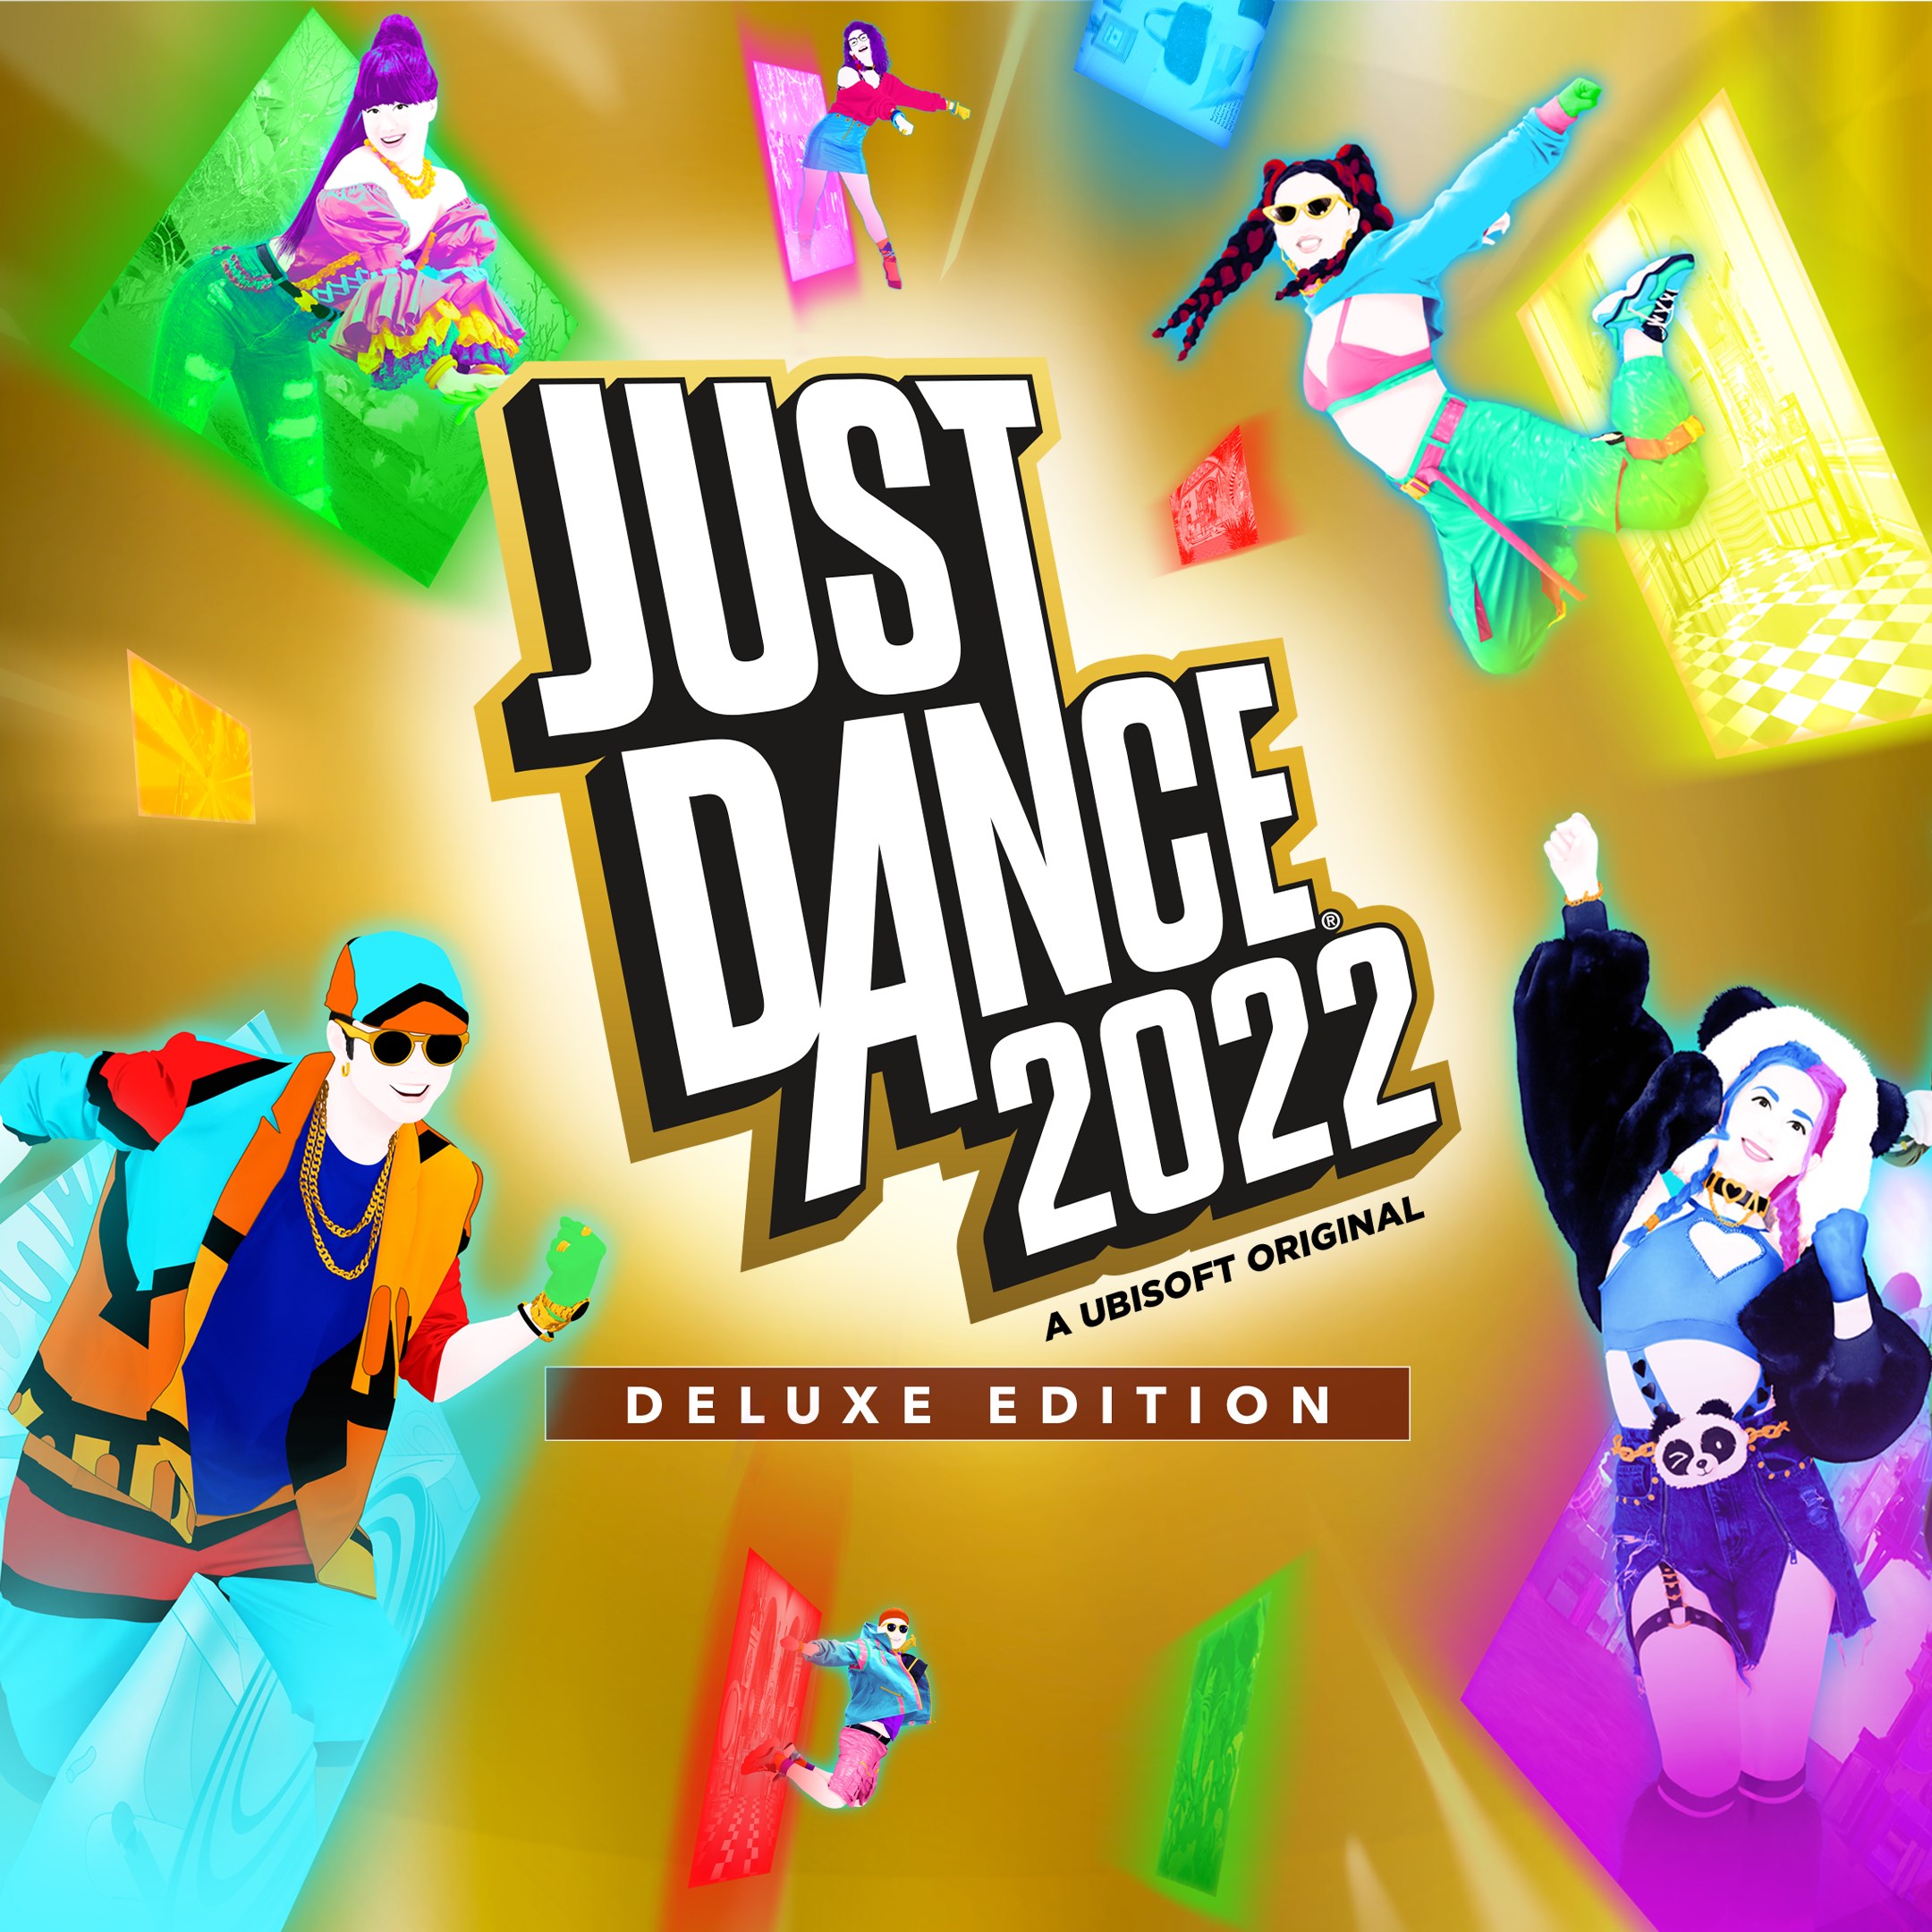 Just Dance® 2022 Deluxe Edition